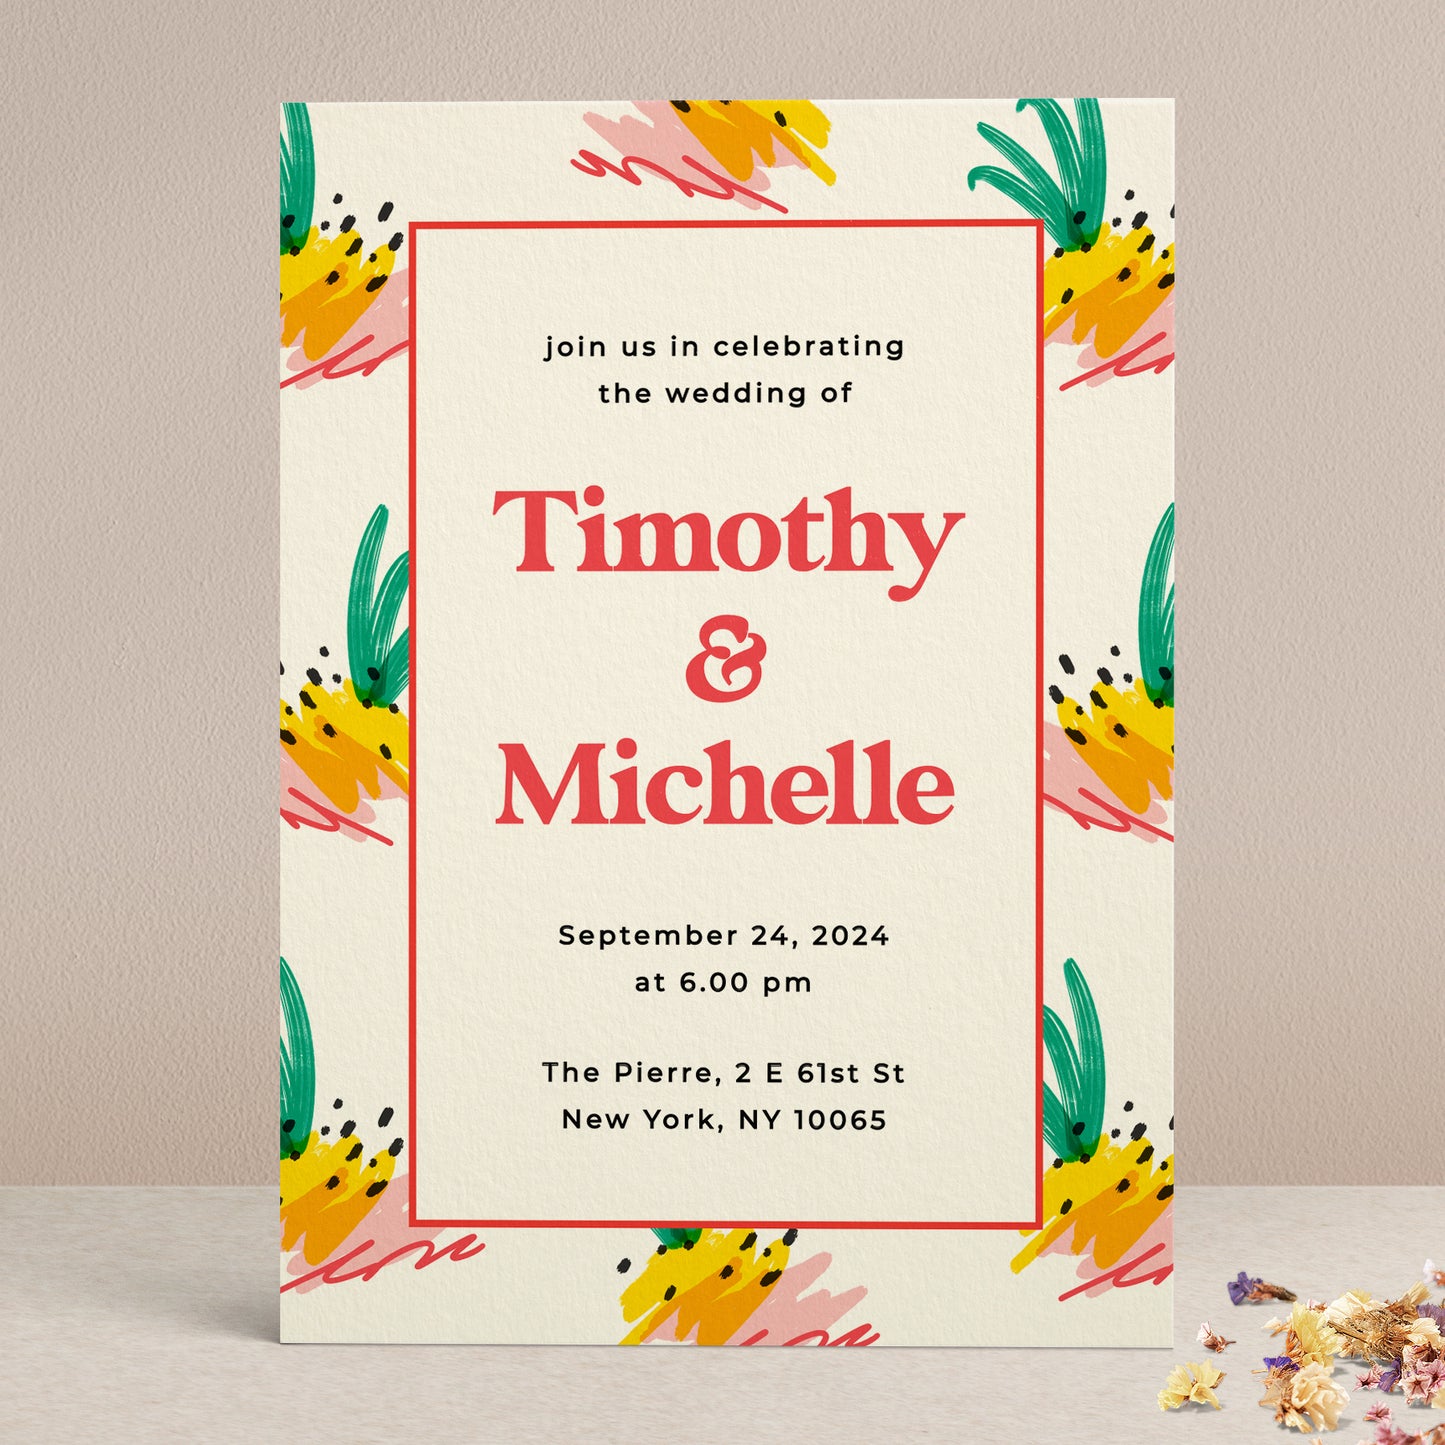 colorful wedding invitations with summer tropical design with abstract pineapples - XOXOKristen